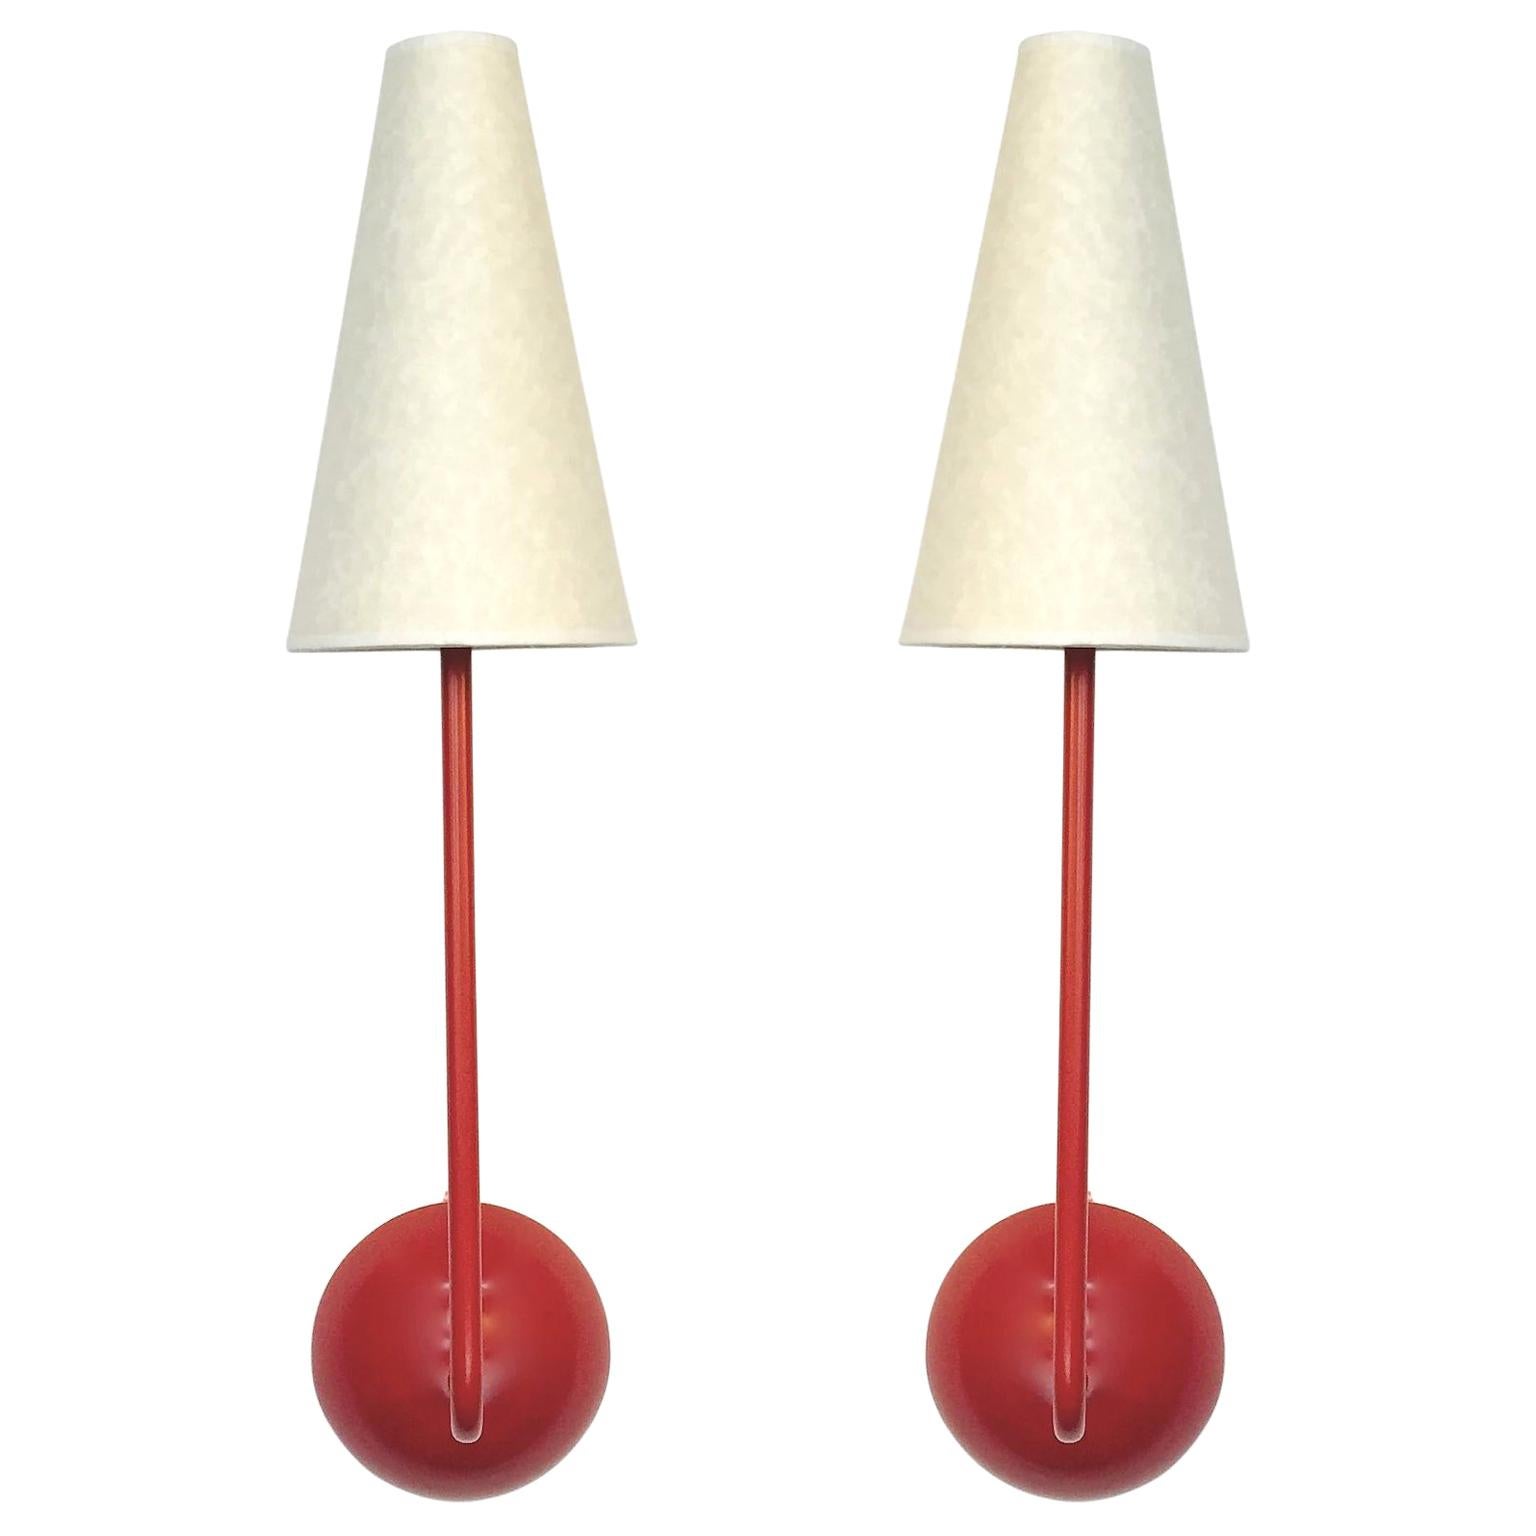 Single-Arm Red Wall Lamp in the Style of Jean Royère